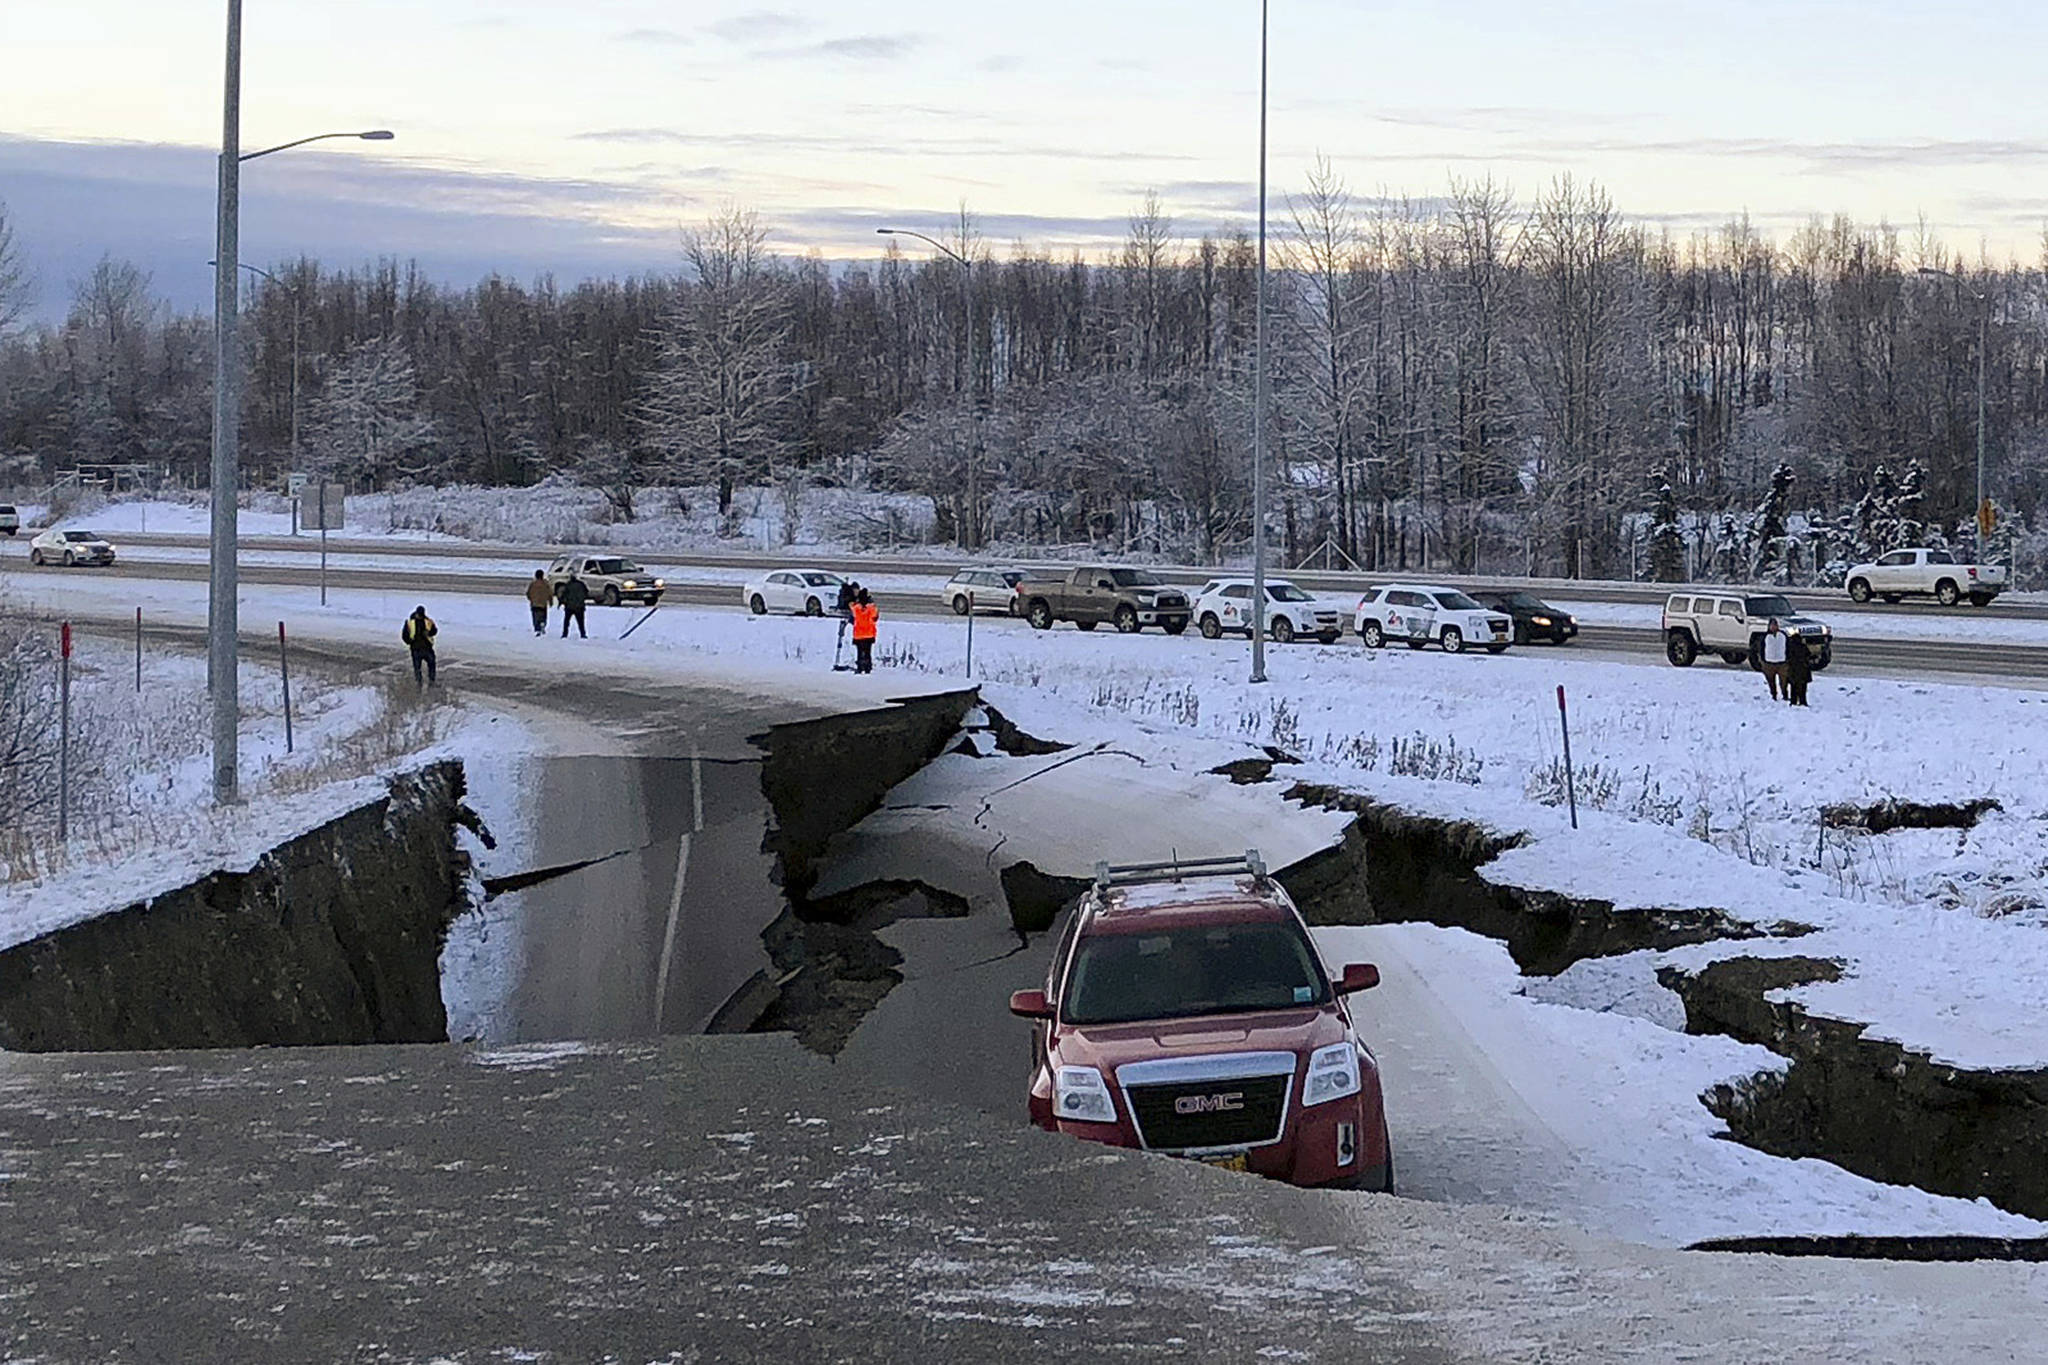 A car A car belonging to Homer resident Tom Sulczynski is trapped on a collapsed section of the offramp of Minnesota Drive in Anchorage, Friday, Nov. 30, 2018. Back-to-back earthquakes measuring 7.0 and 5.8 rocked buildings and buckled roads Friday morning in Anchorage, prompting people to run from their offices or seek shelter under office desks, while a tsunami warning had some seeking higher ground. (AP Photo/Dan Joling)